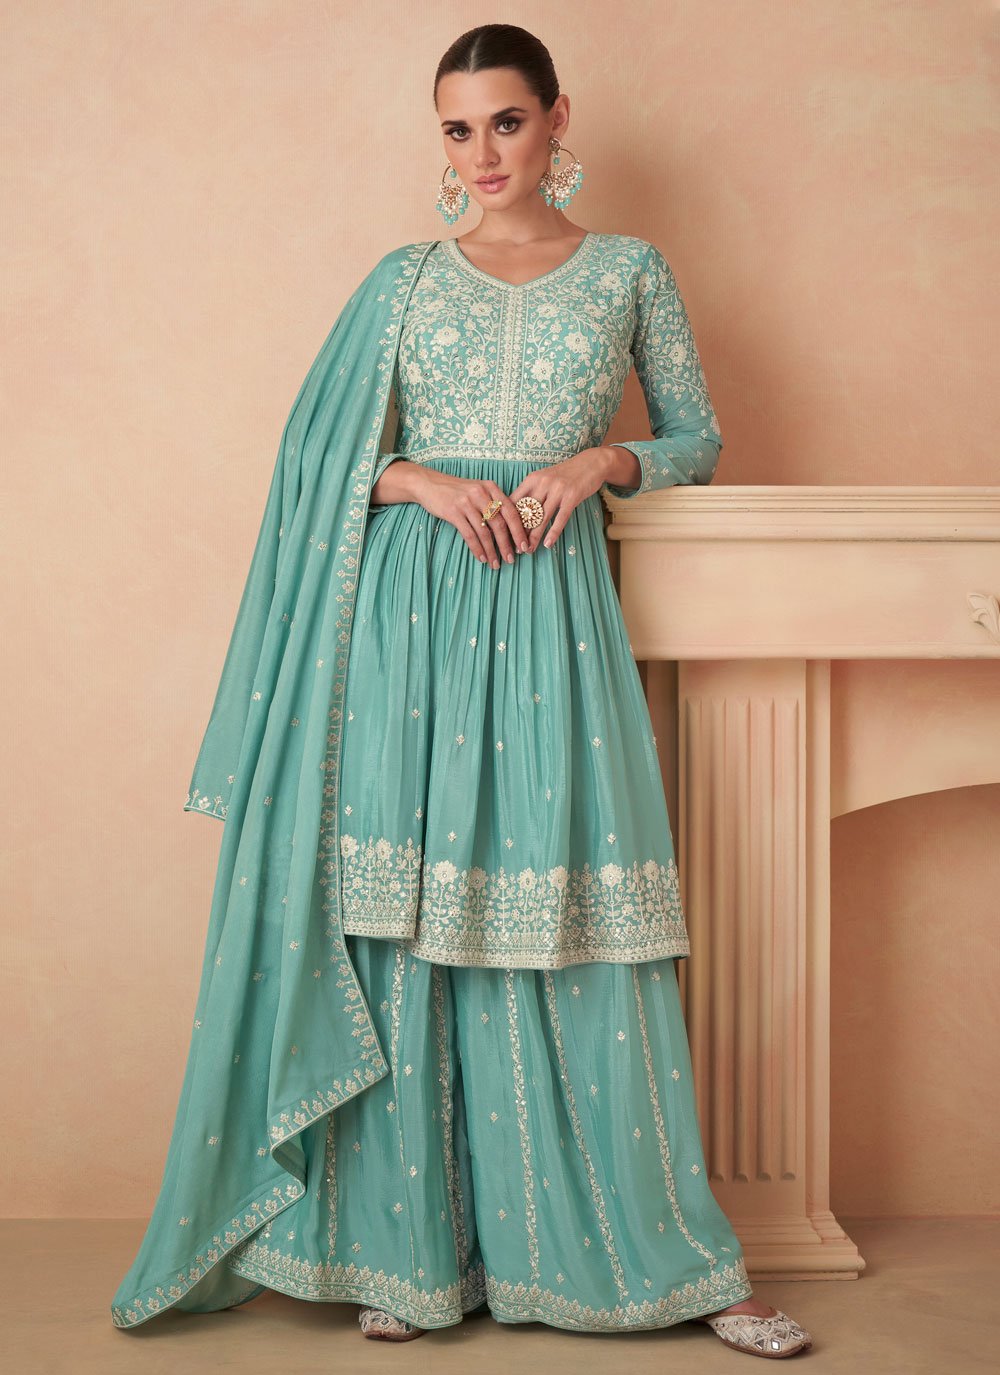 Embroidered and Resham Work Chinon Salwar Suit In Sea Green